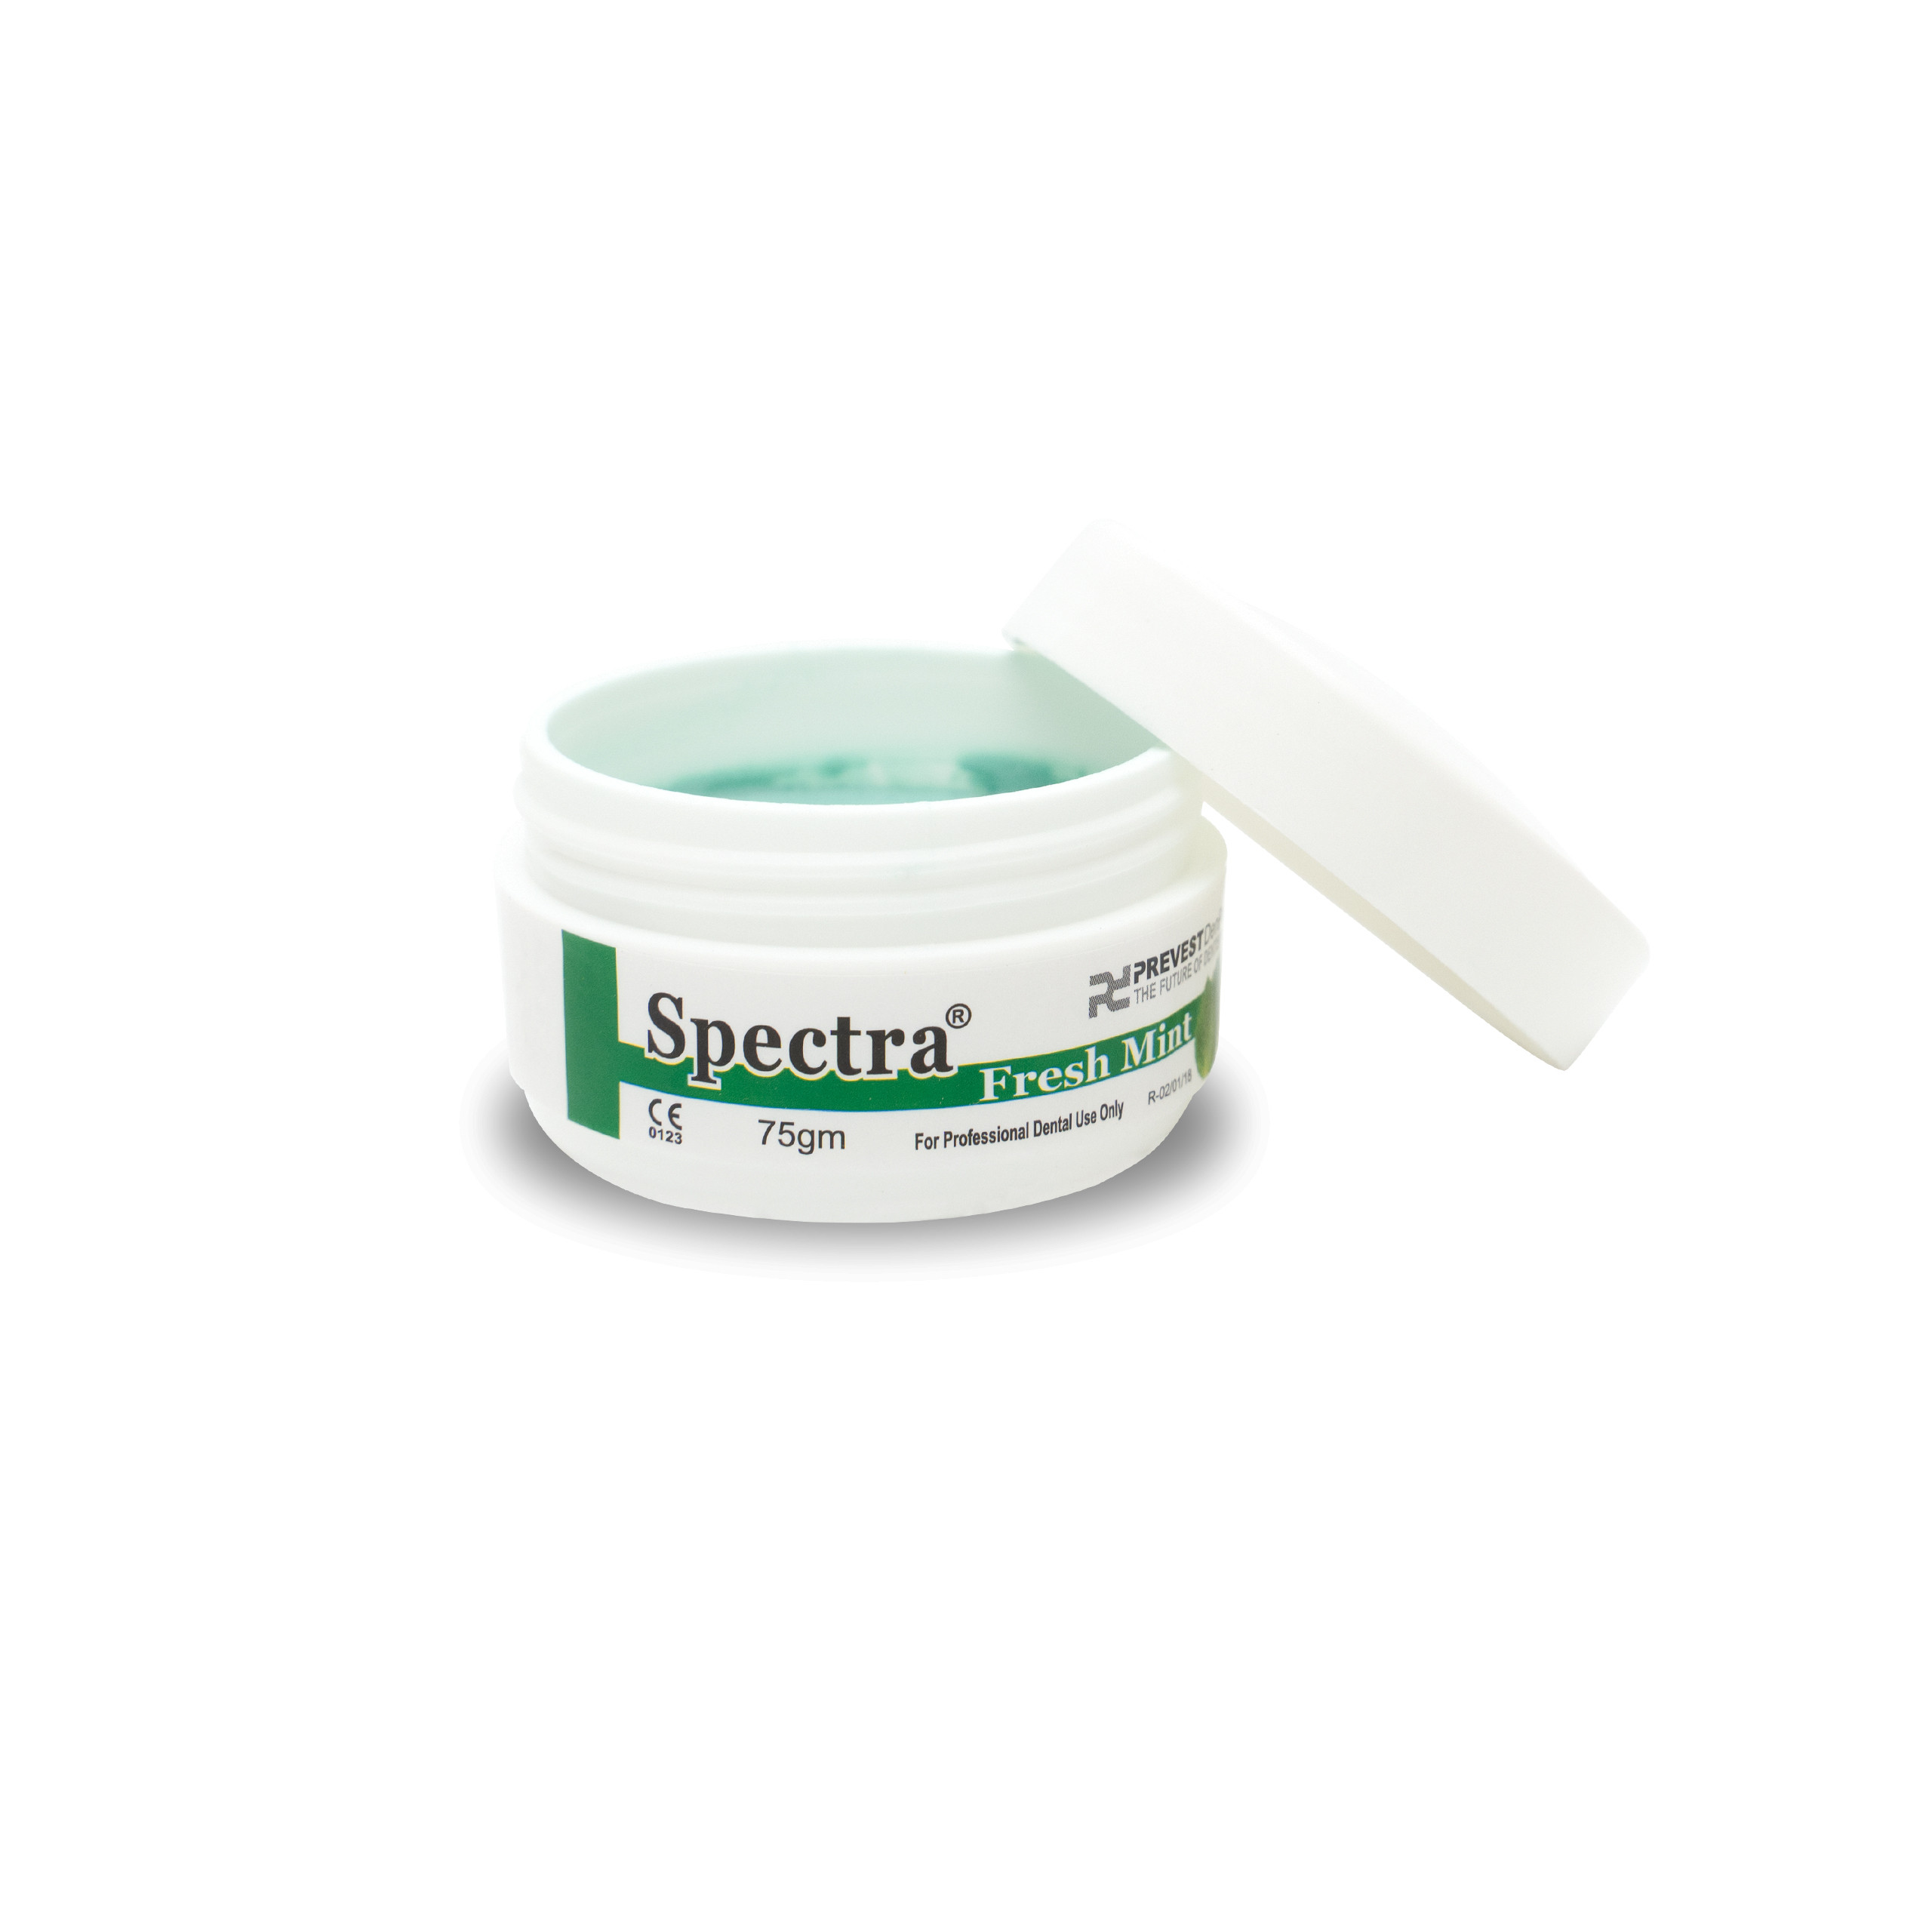 Prevest Spectra Prophy Paste with Fluoride Fresh Mint 75gm Jar